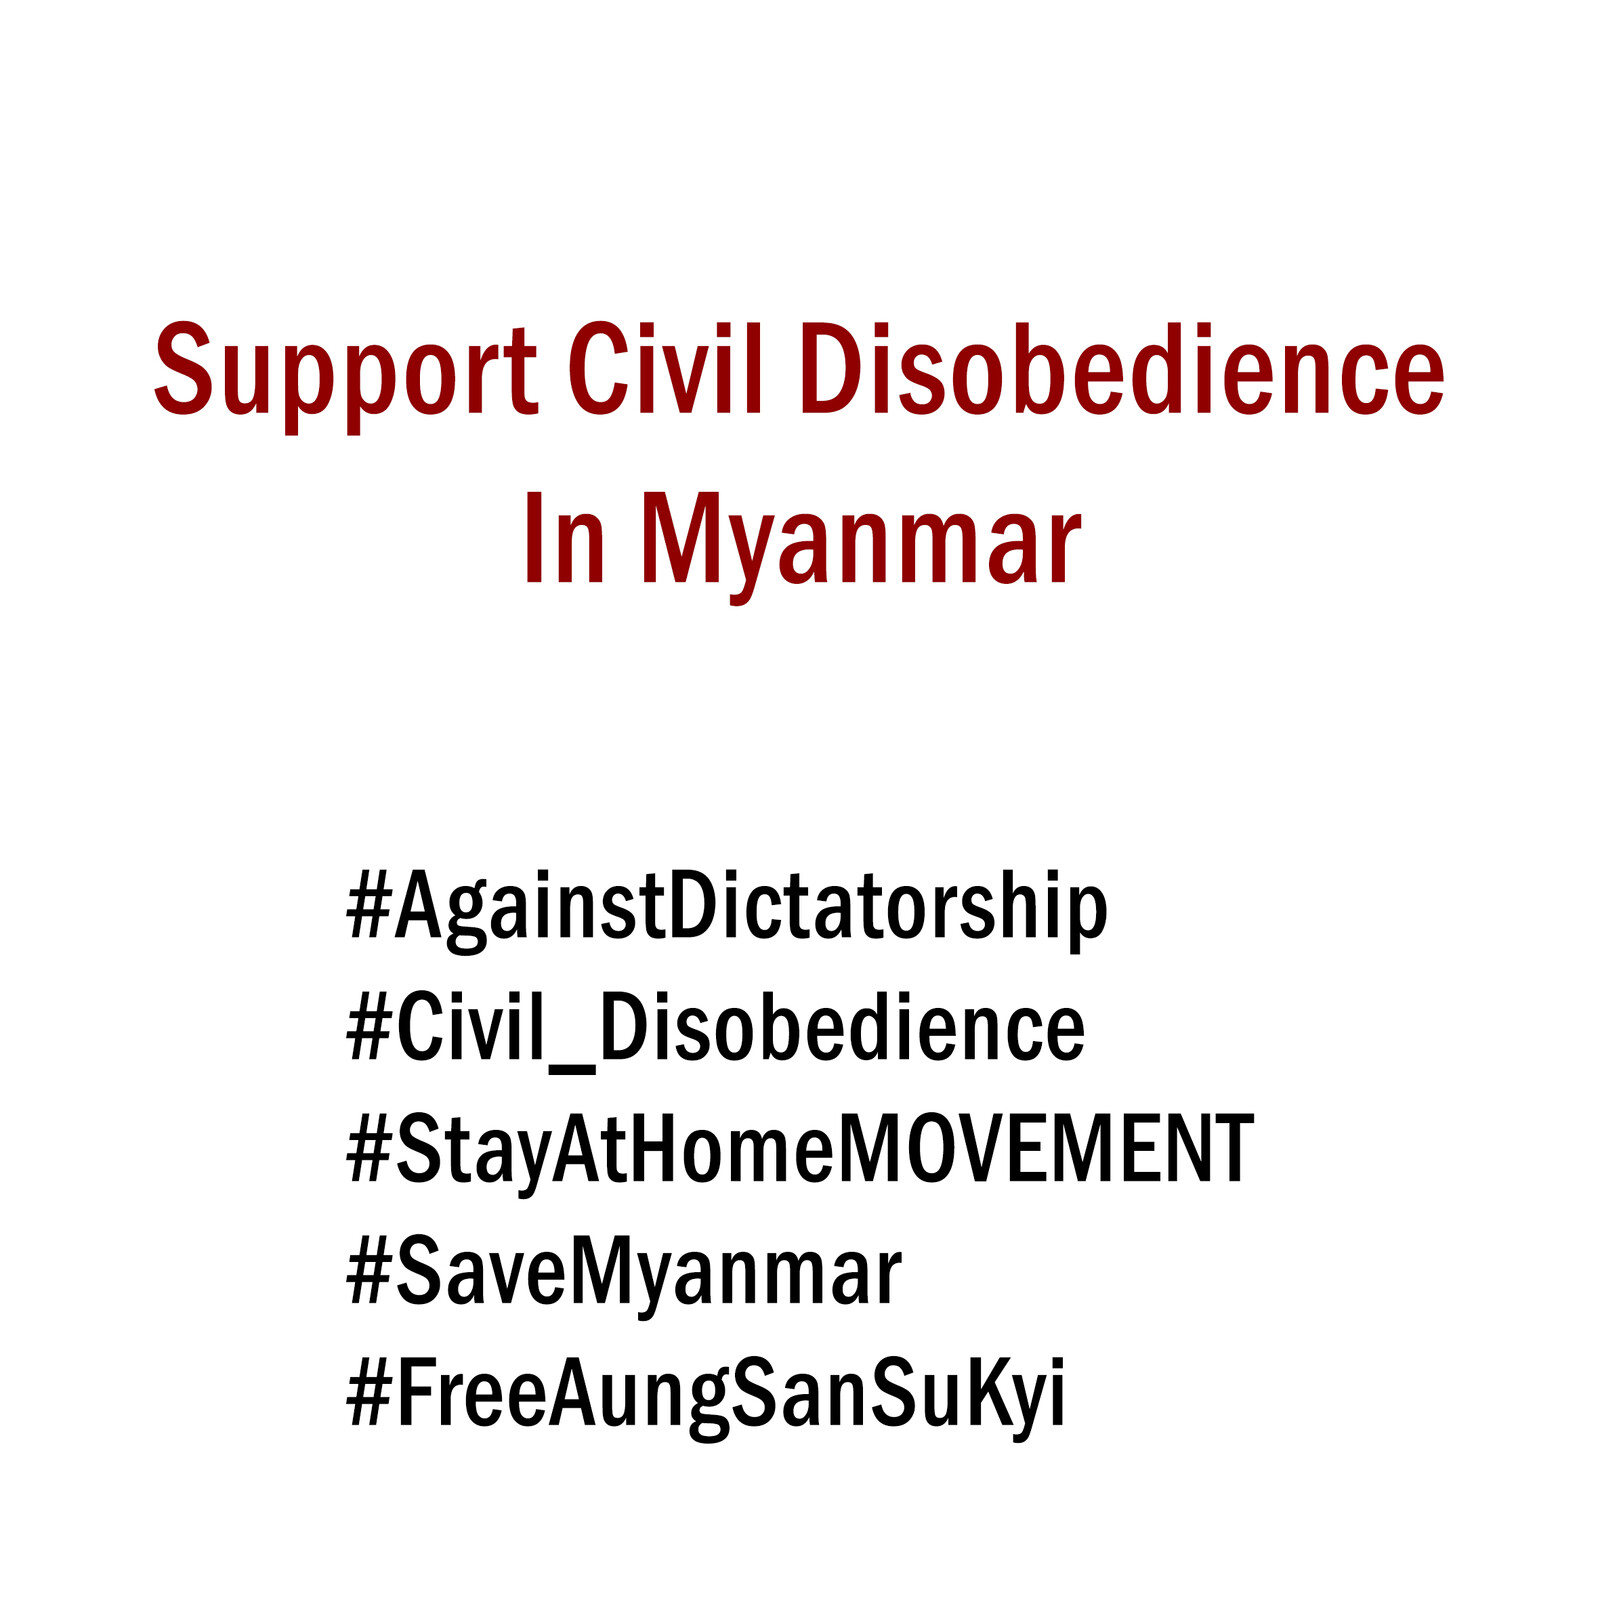 Support Civil Disobedience Movement in Myanmar- 4